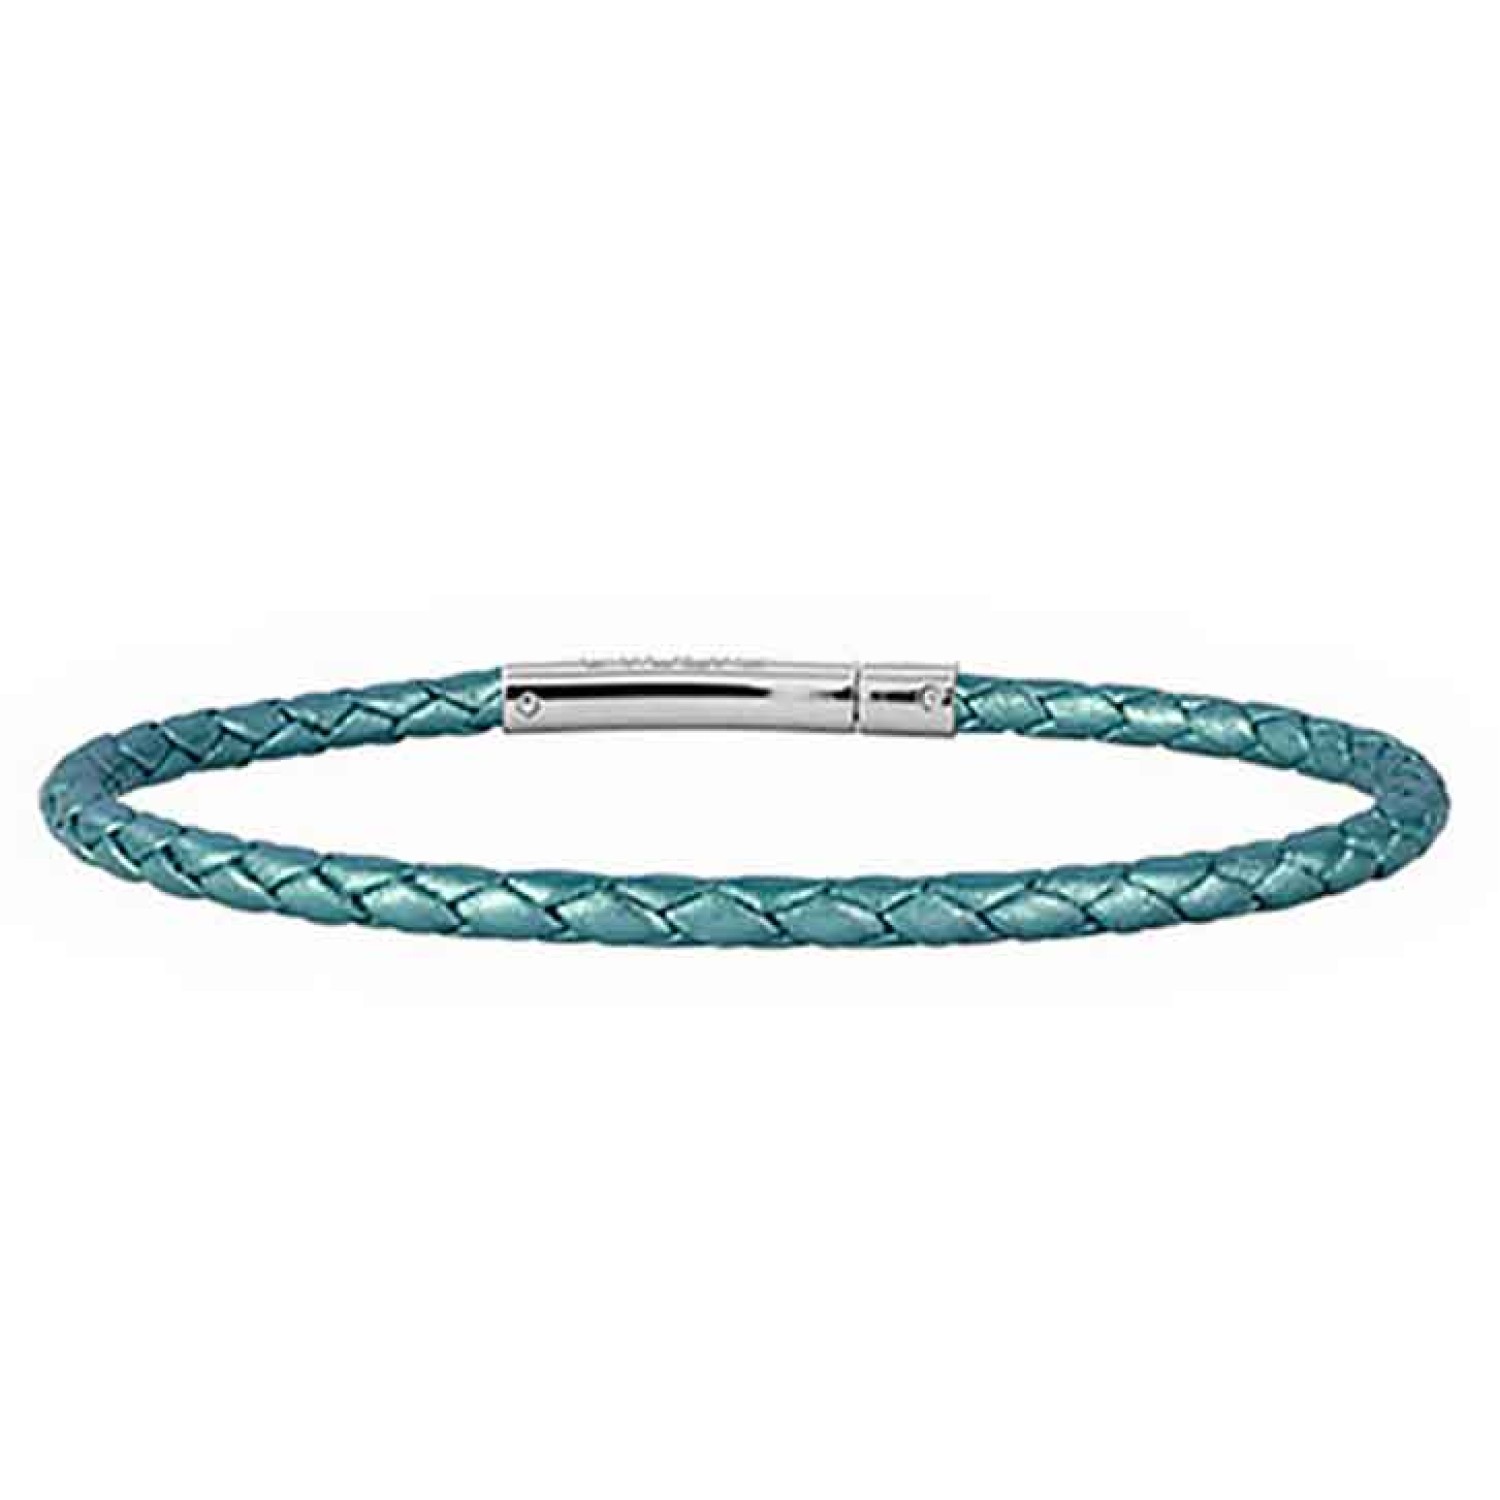 LKBEL-TL19-1 Evolve Teal Single Twist Leather Bracelet. Evolves Journey bracelets are designed as an everyday companion for life’s journey. The beautiful interlinked pattern reminds us of woven ﬂax (harakeke), a stylish & meaningful part of Māori cult